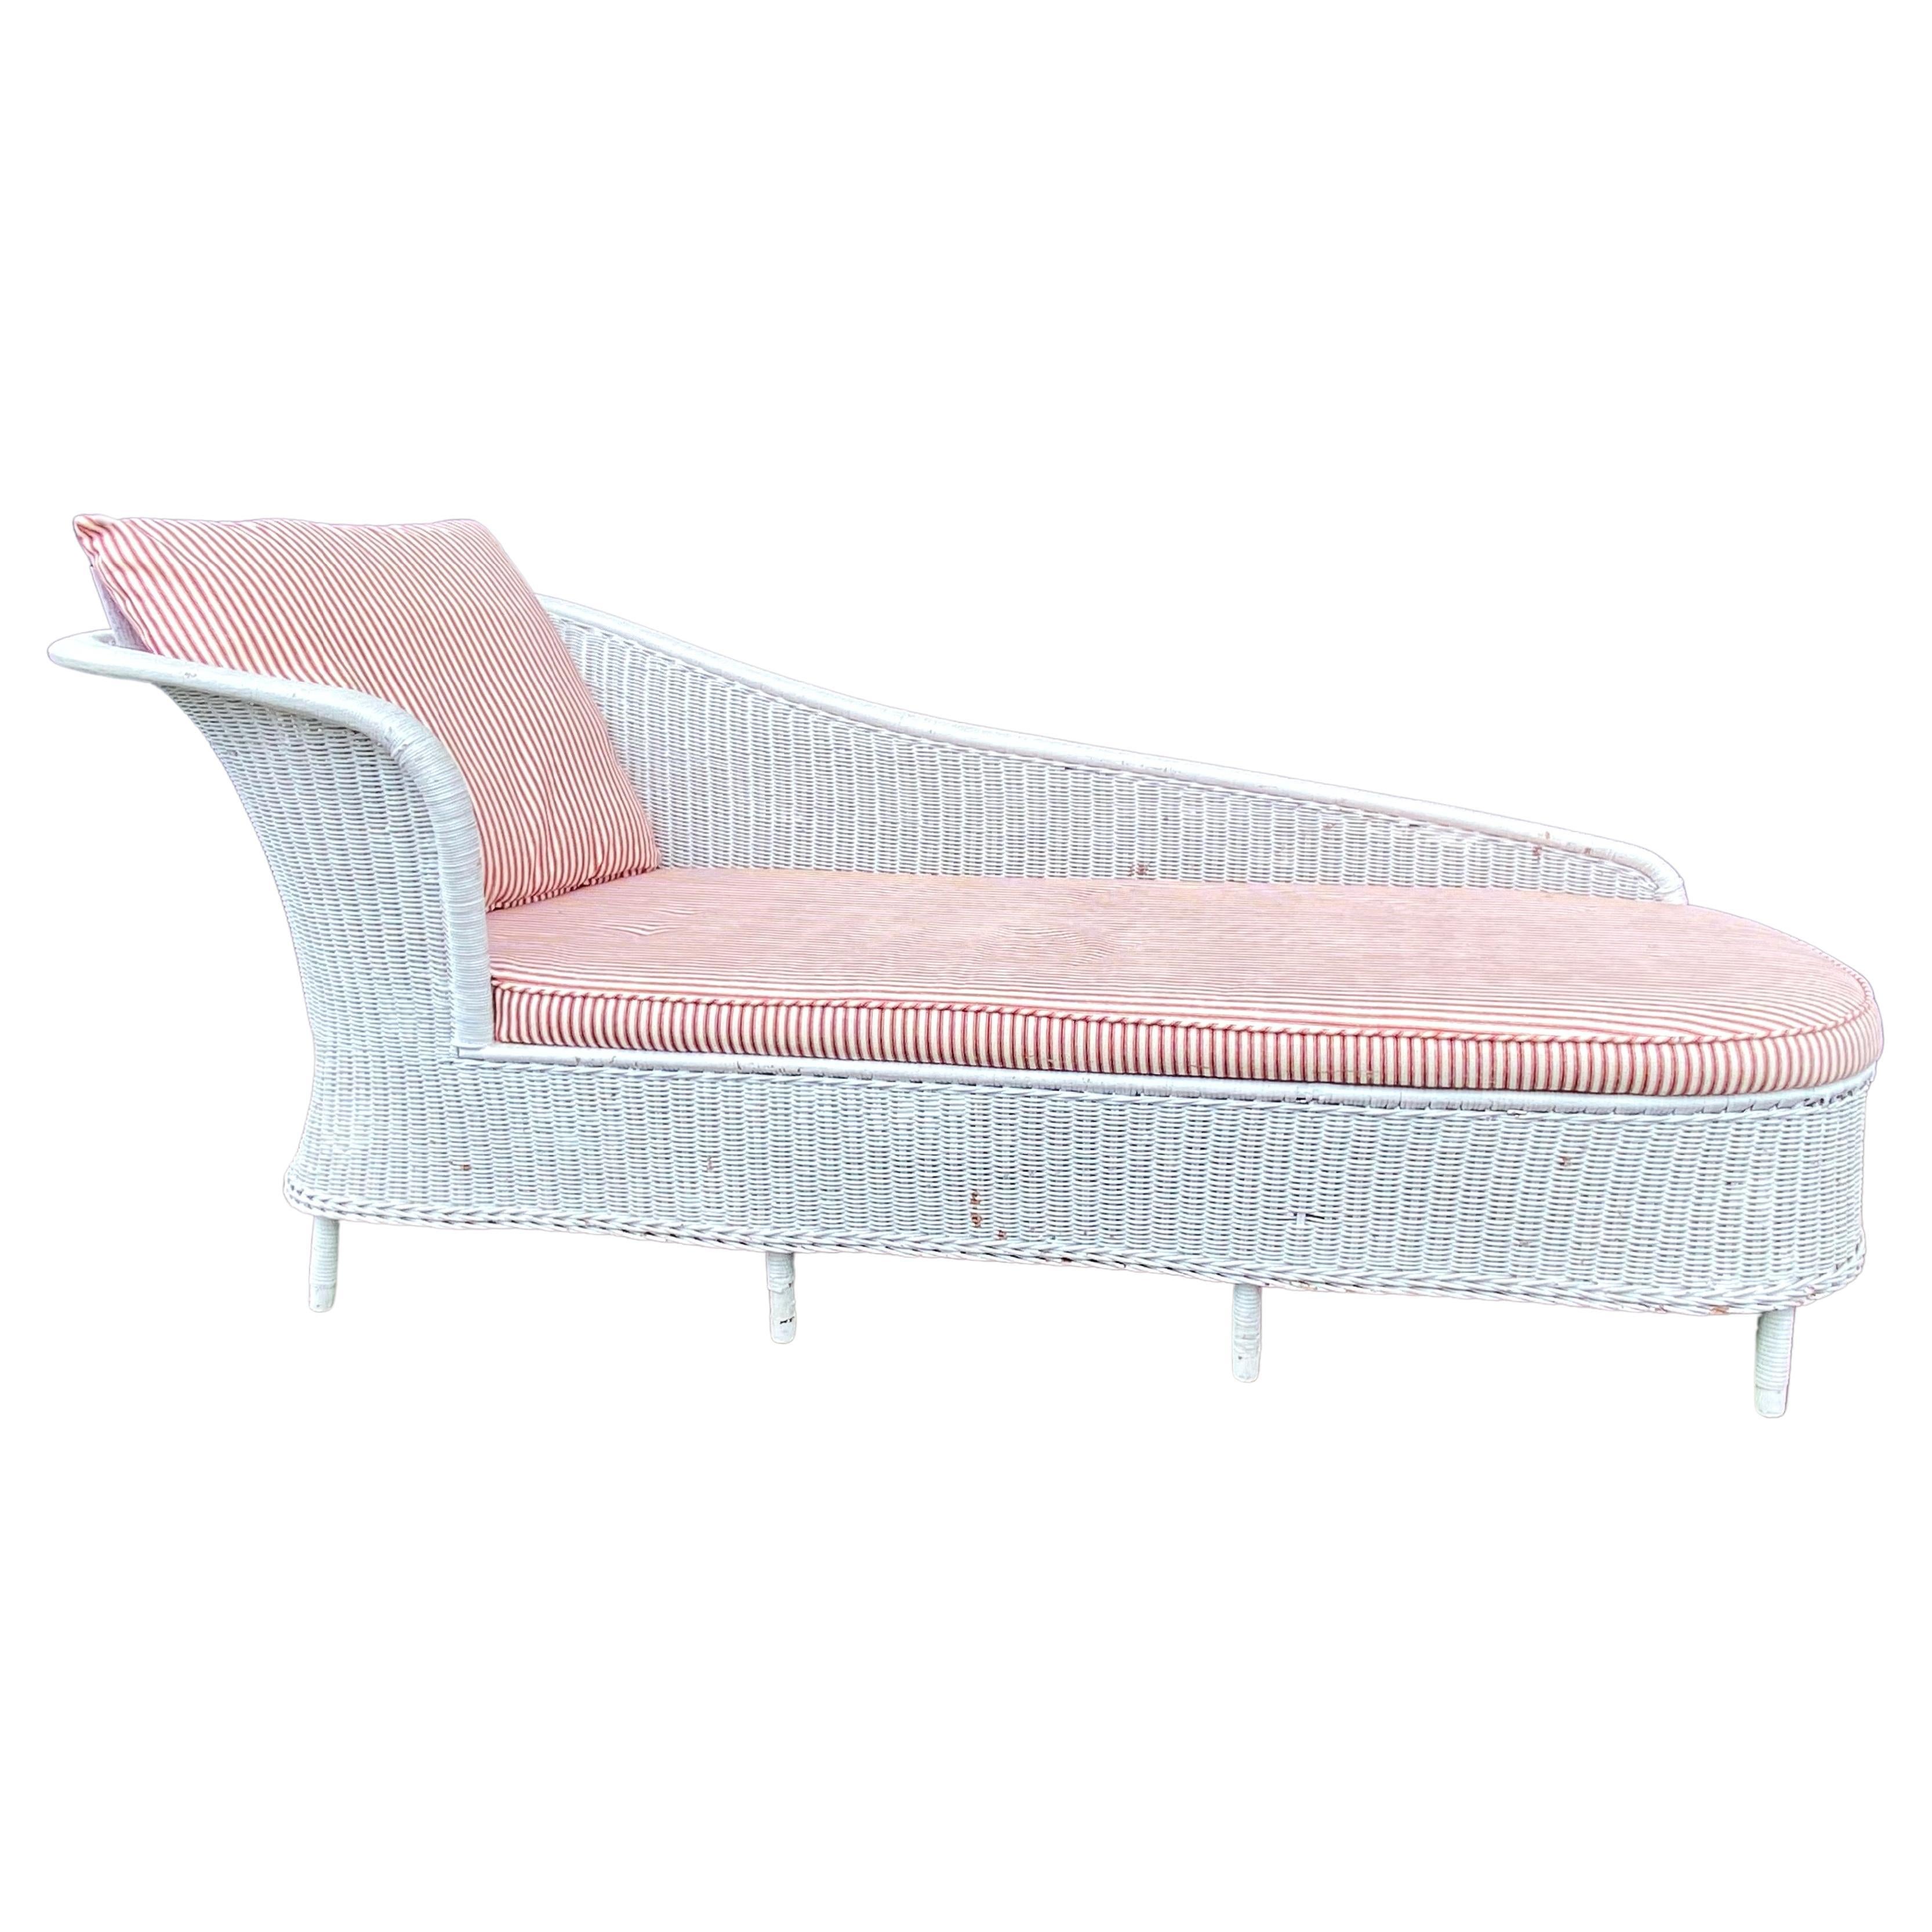 Antique Wicker Chaise Longue or Daaybed For Sale